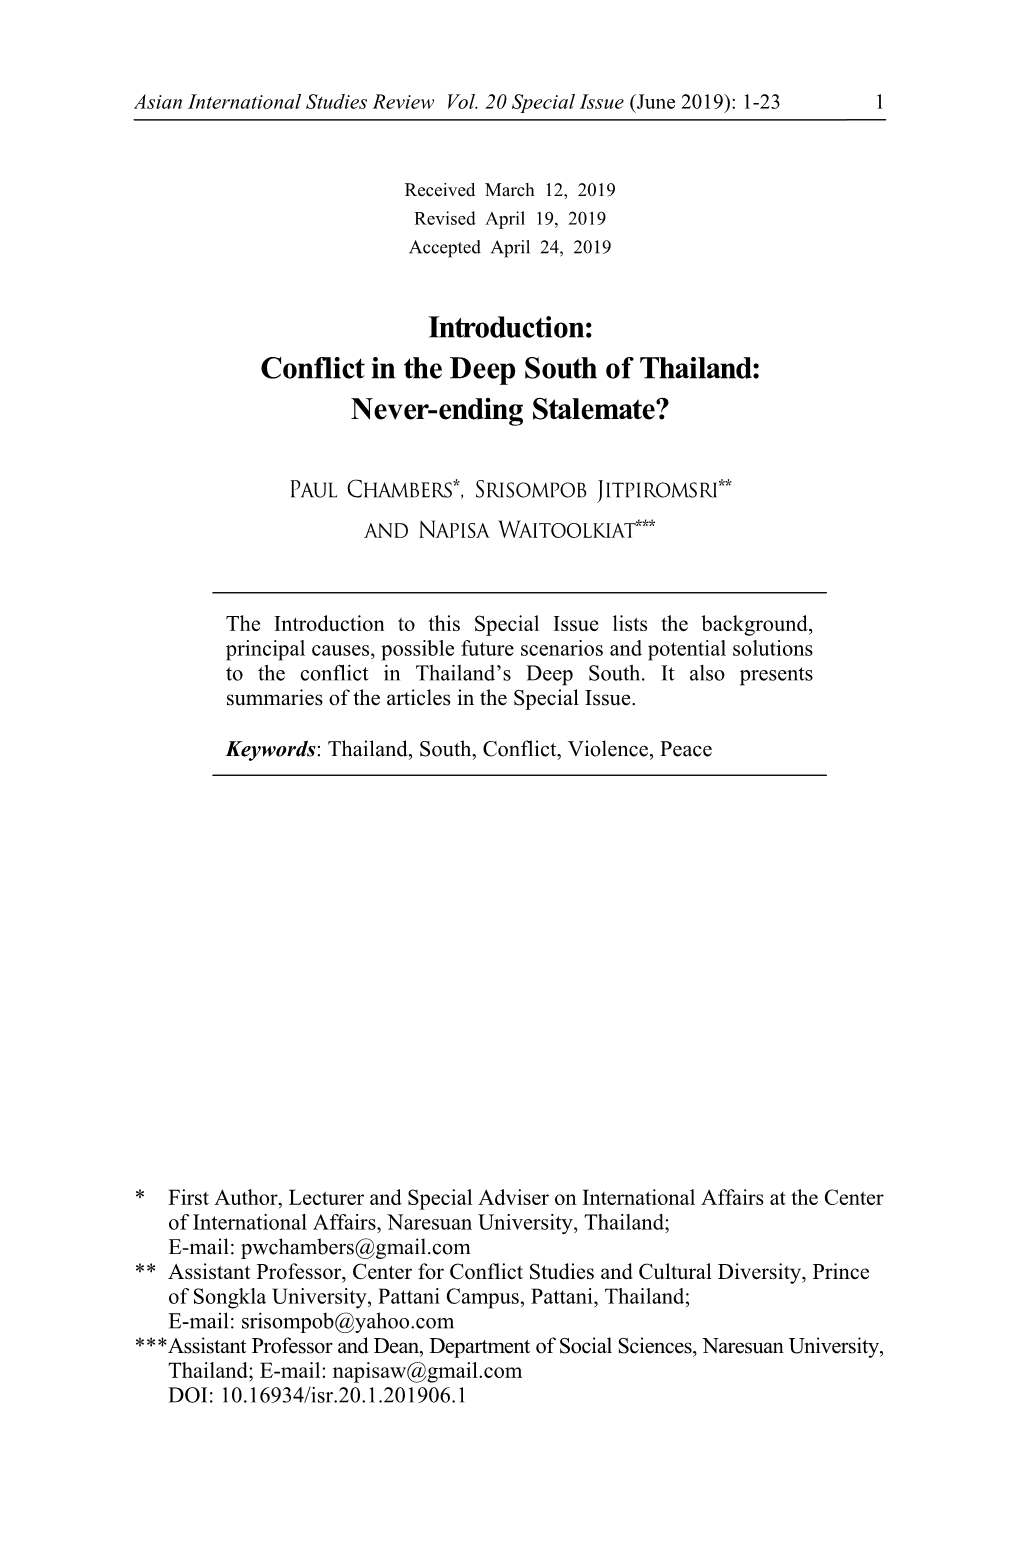 2-1. Introduction, Conflict in the Deep South of Thailand Never-Ending